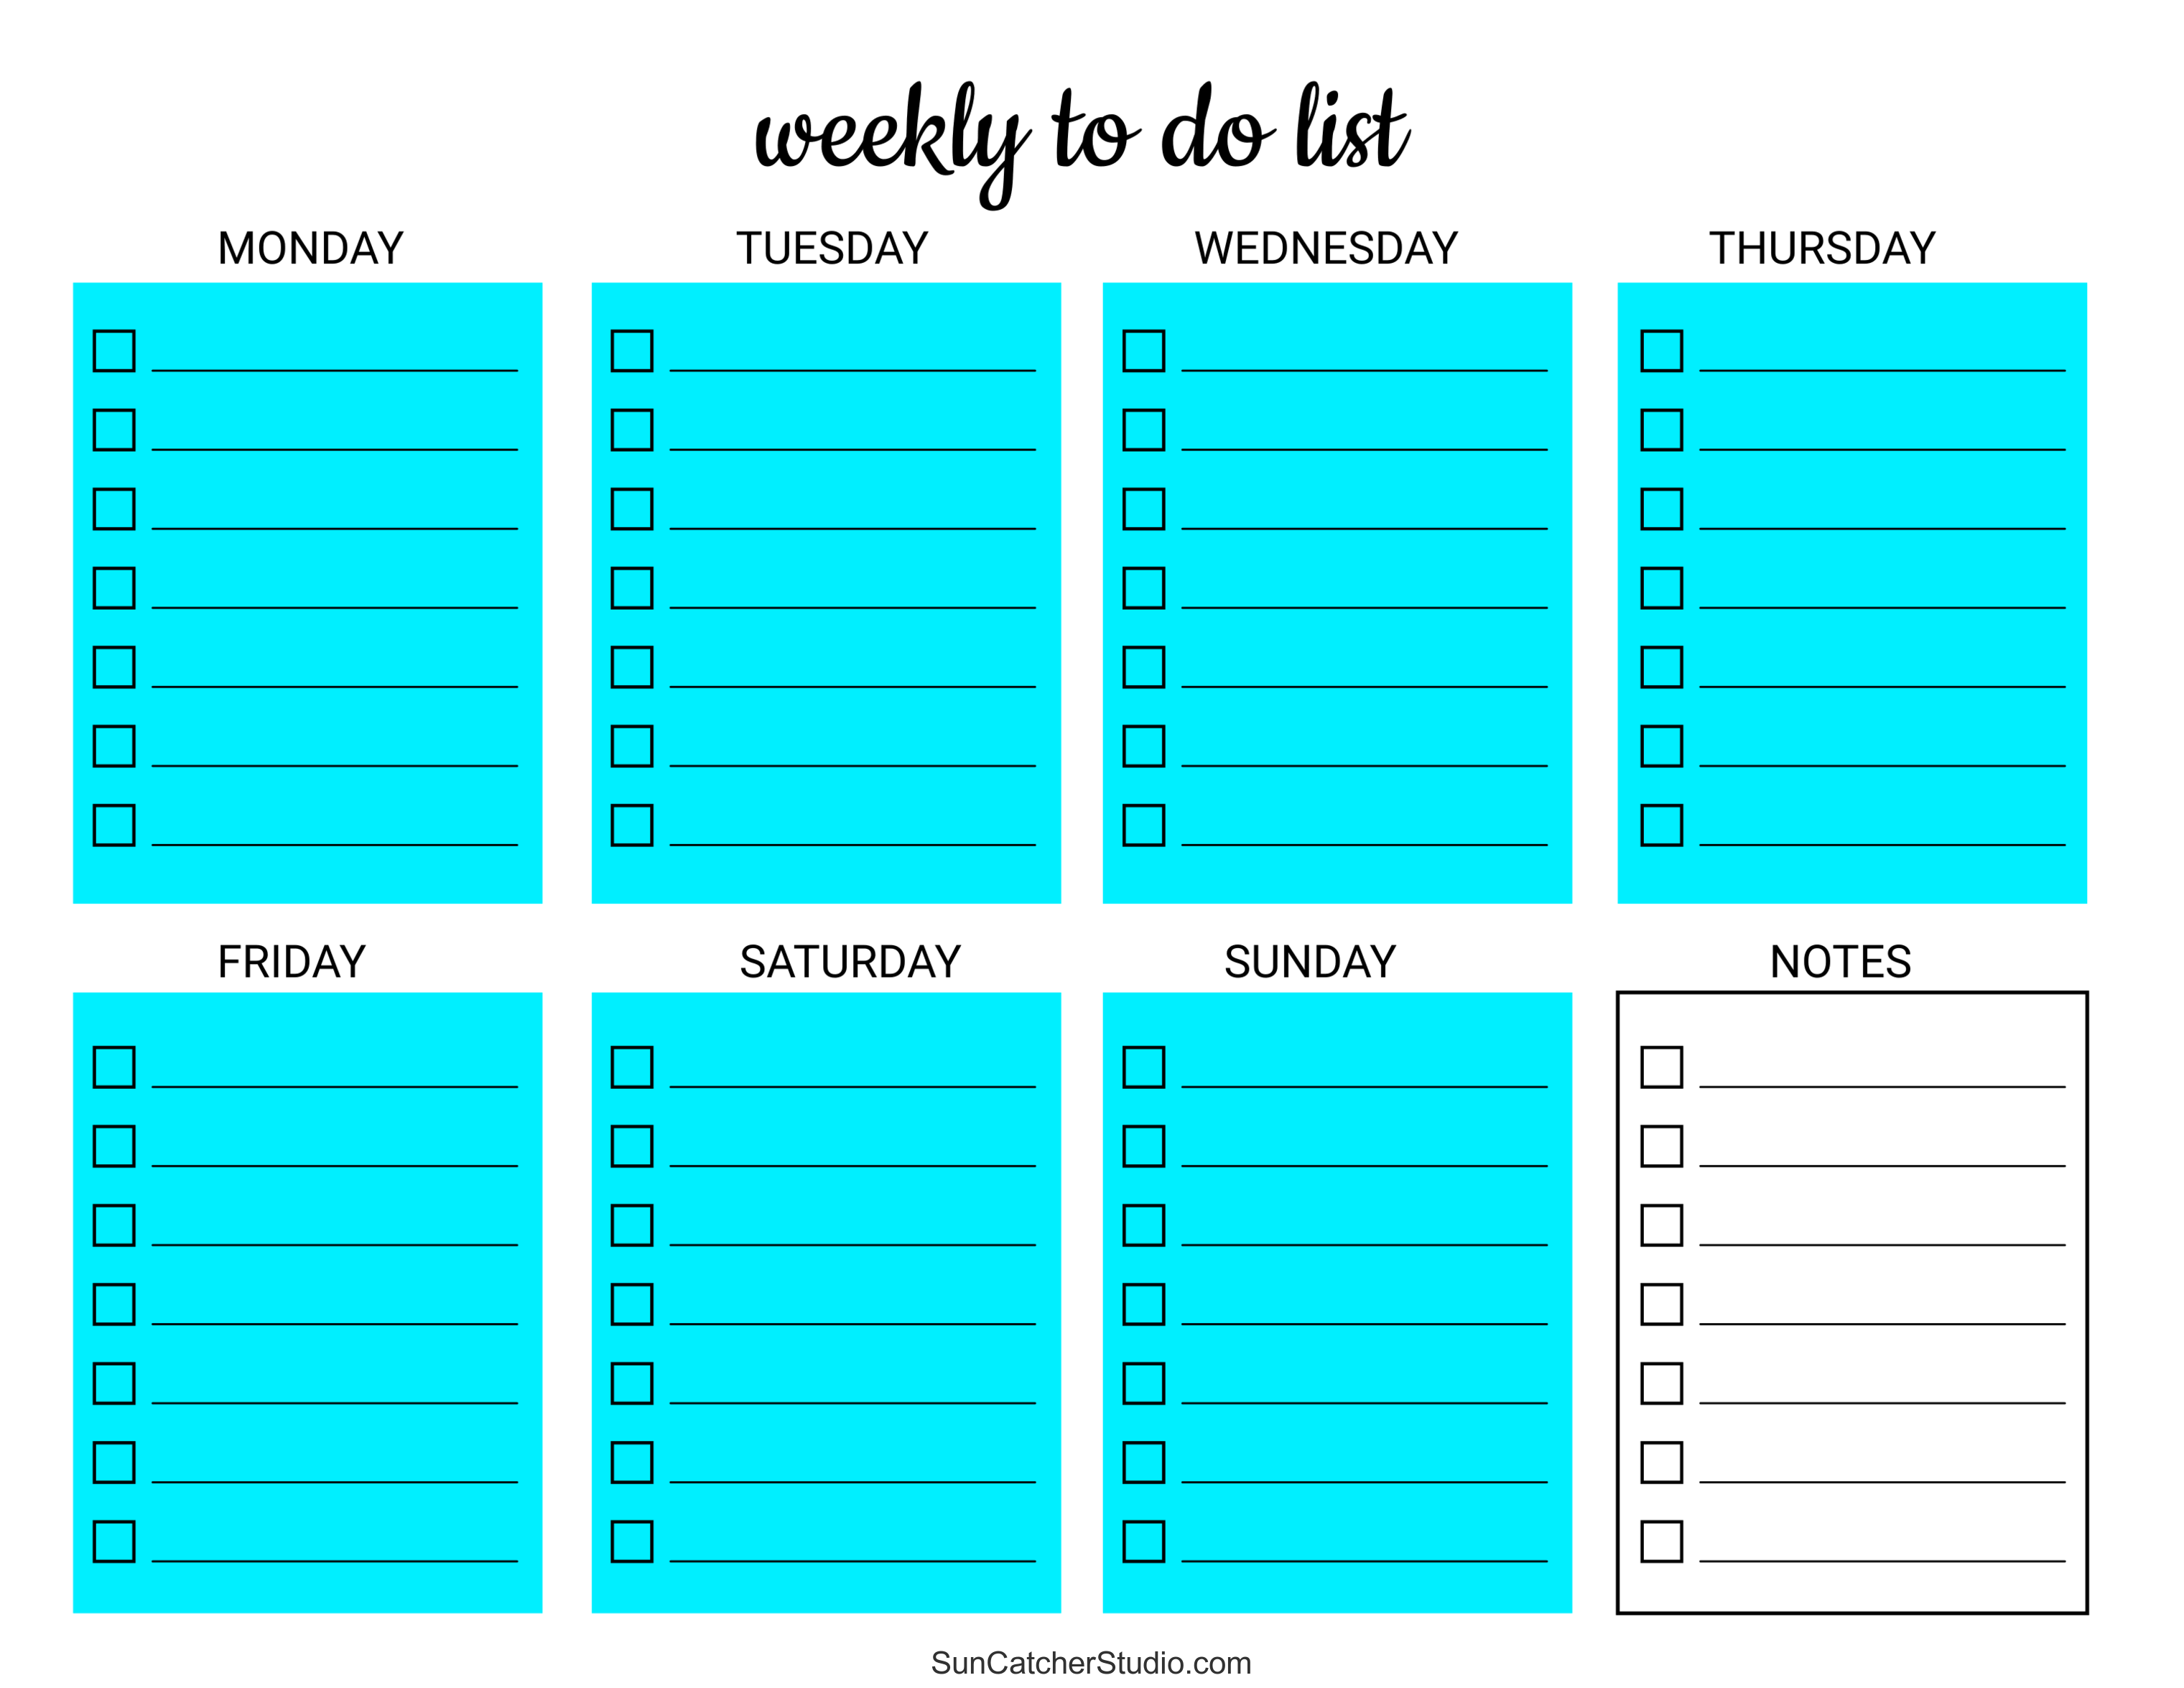 cute daily to do list template